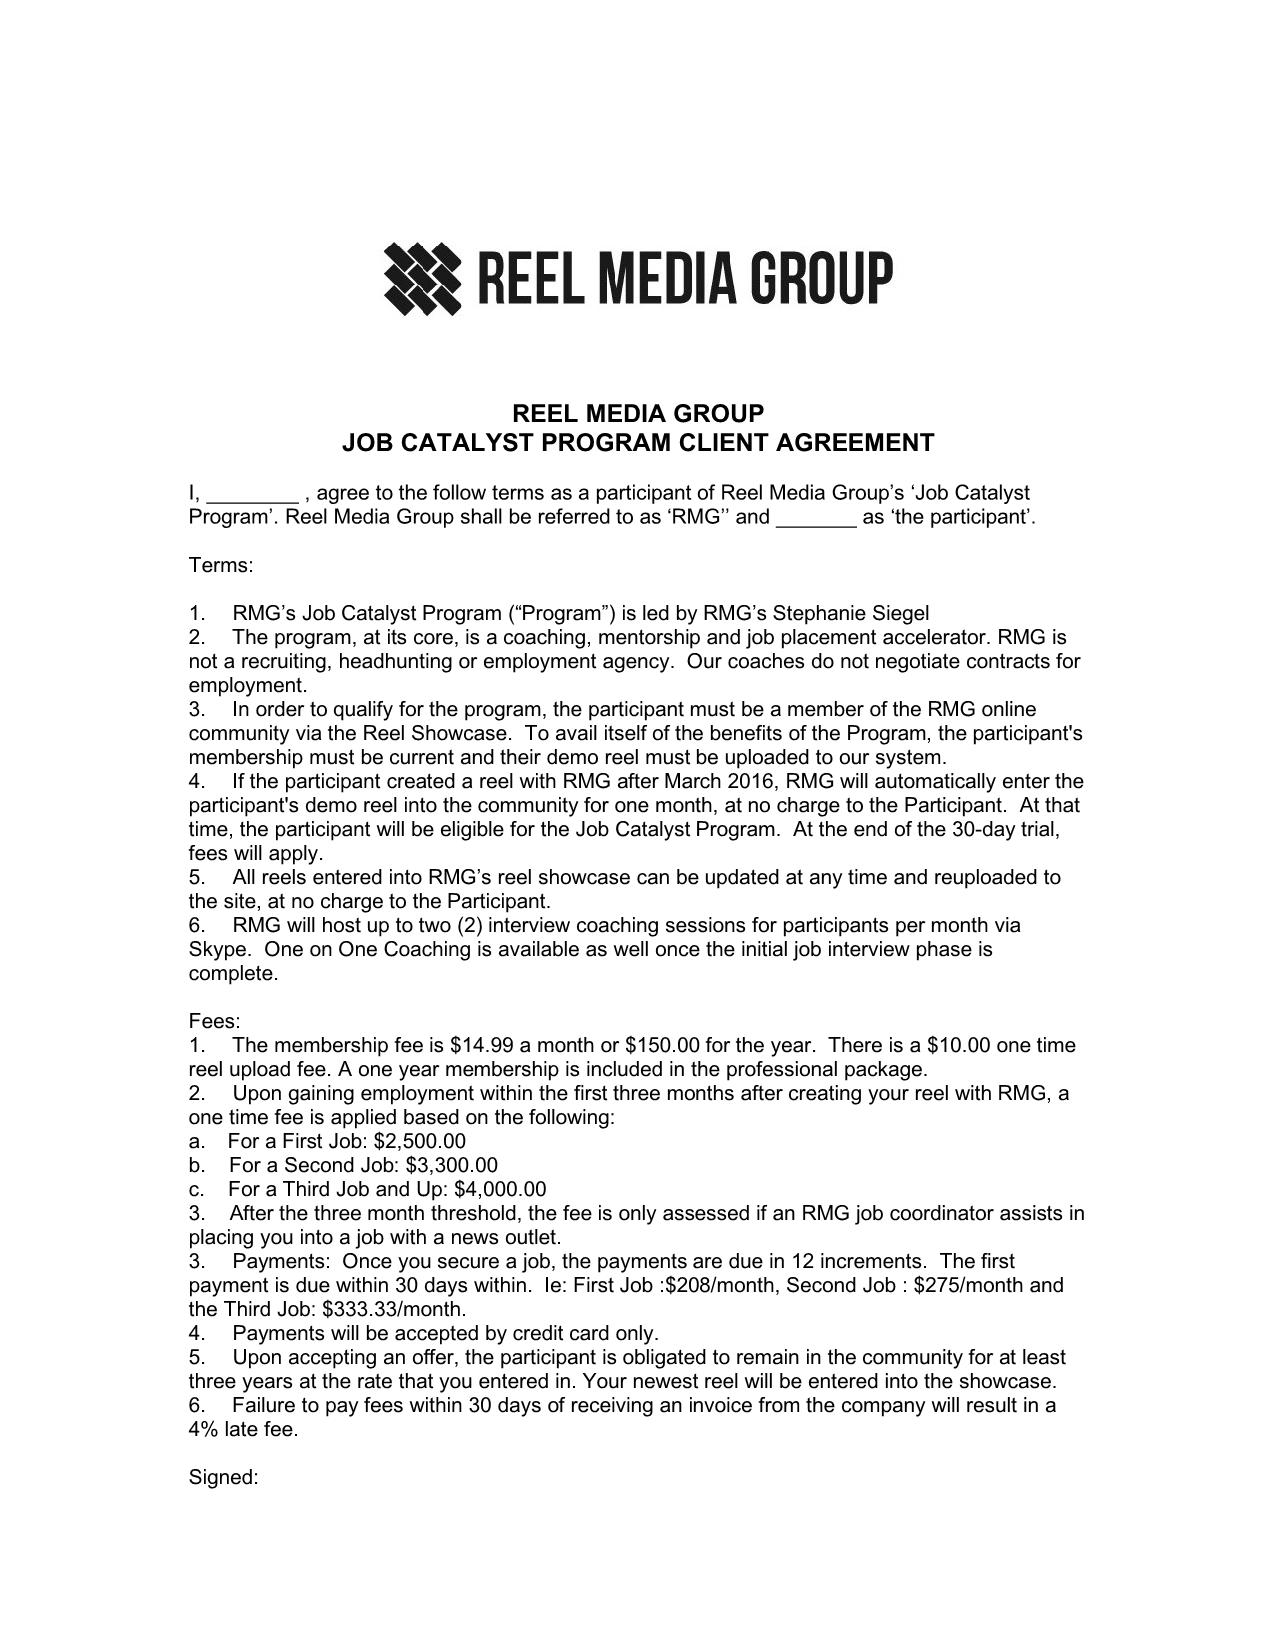 Reel Media Group Contract Agreement